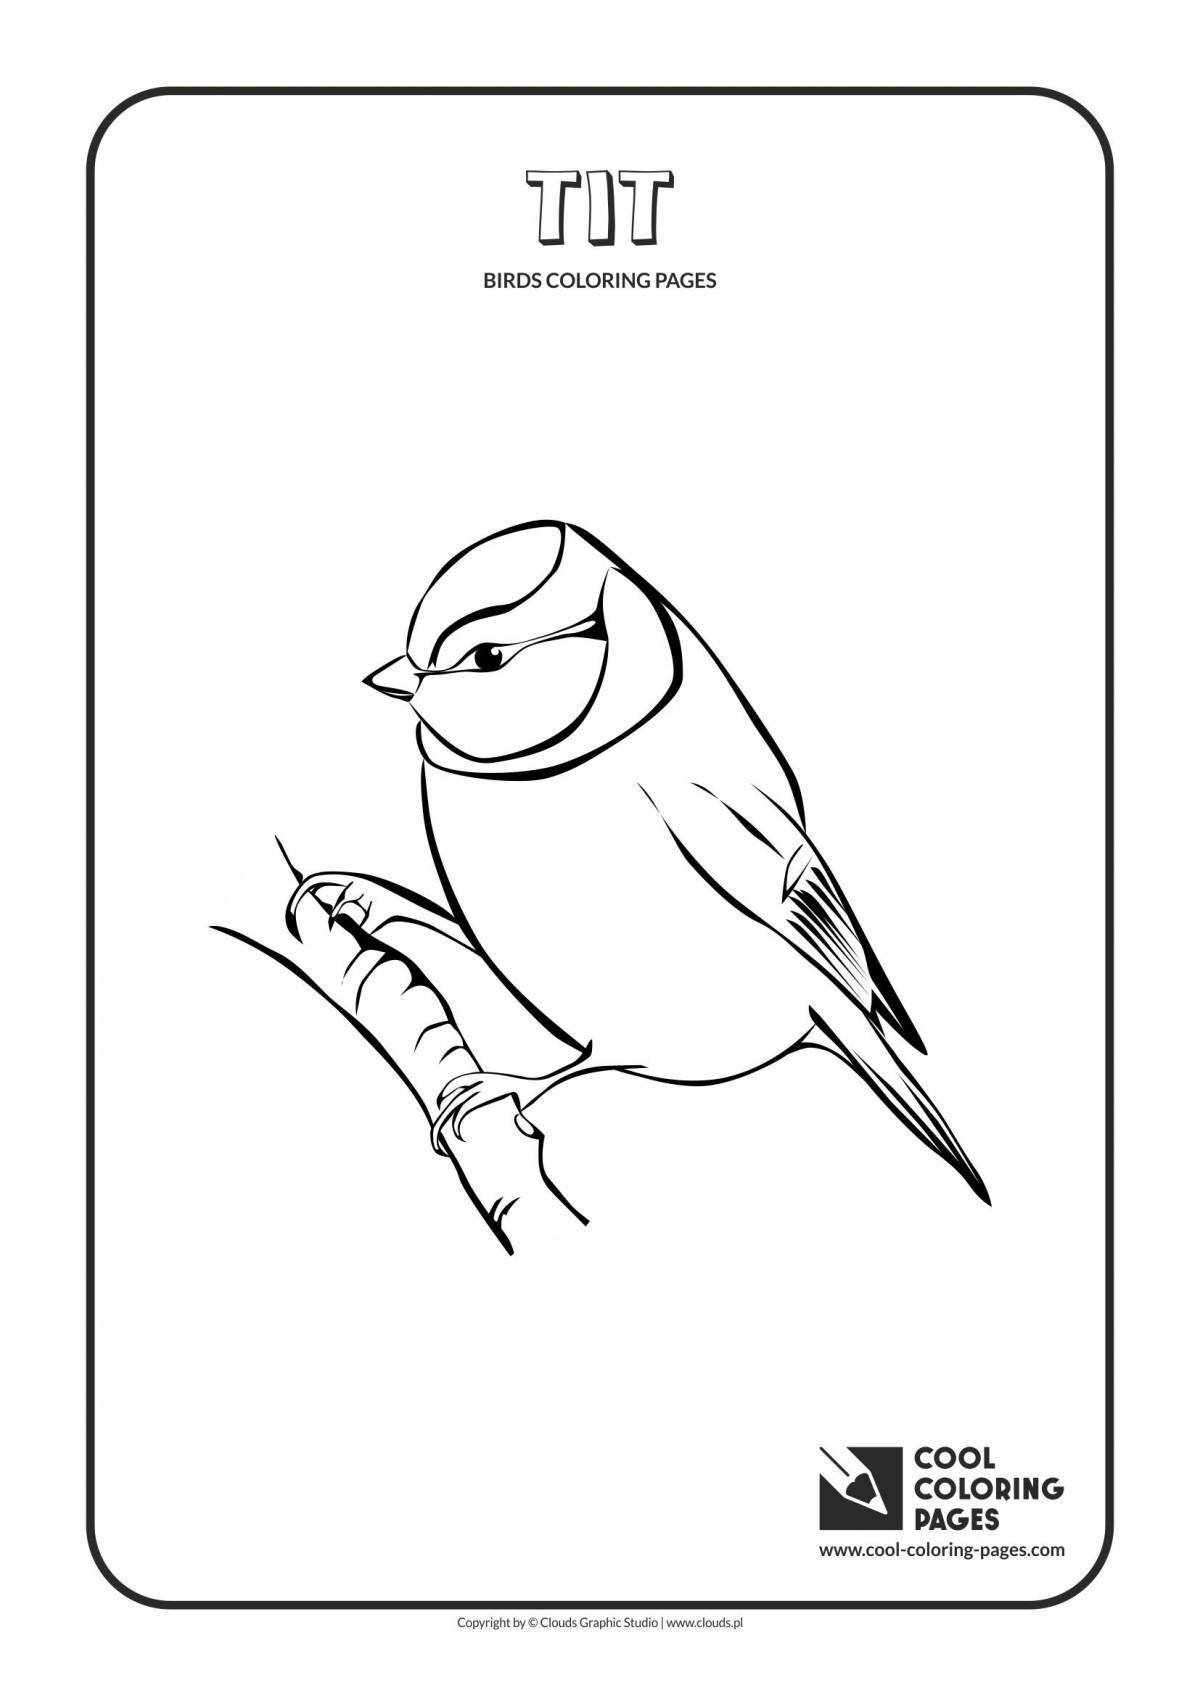 Great tit coloring for juniors